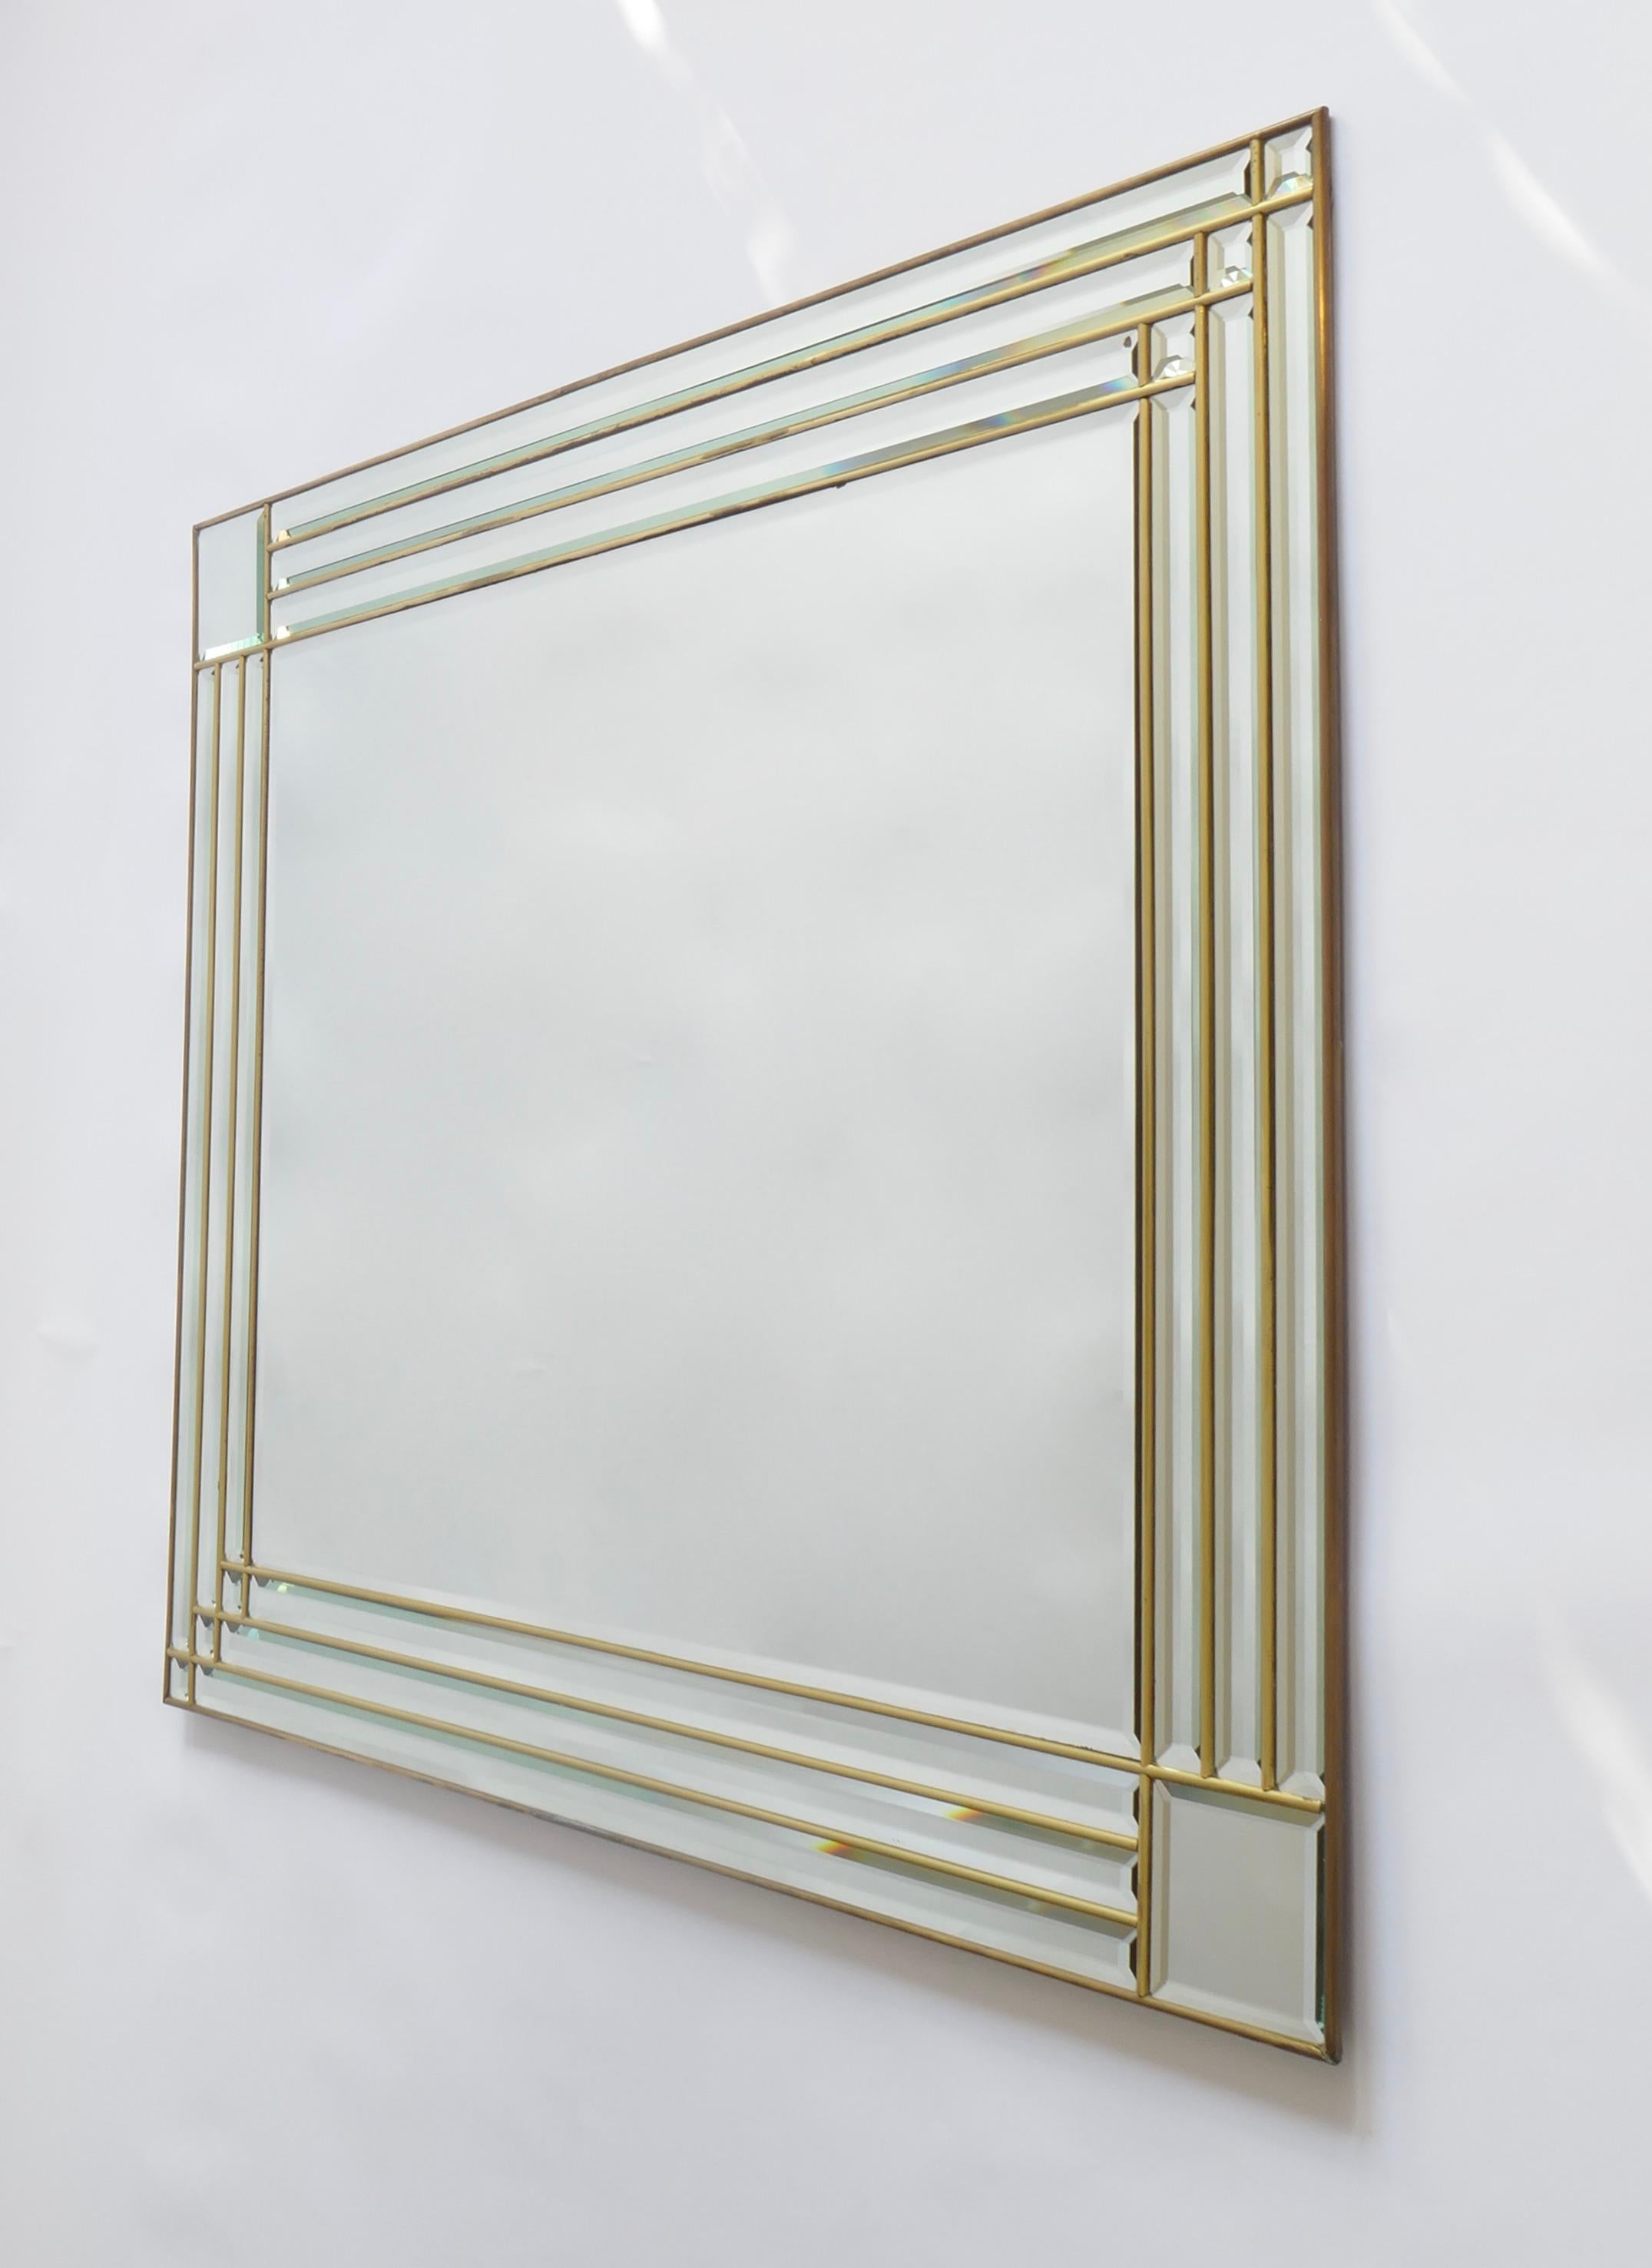 Beautiful big rectangular beveled mirror with Brass beaded frame.
Perfect in an entrance over a console table or in a living room or a bedroom
It currently hangs horizontally but it can be made hang vertically
Measures: H 101.5 x W 121.5
Italy,